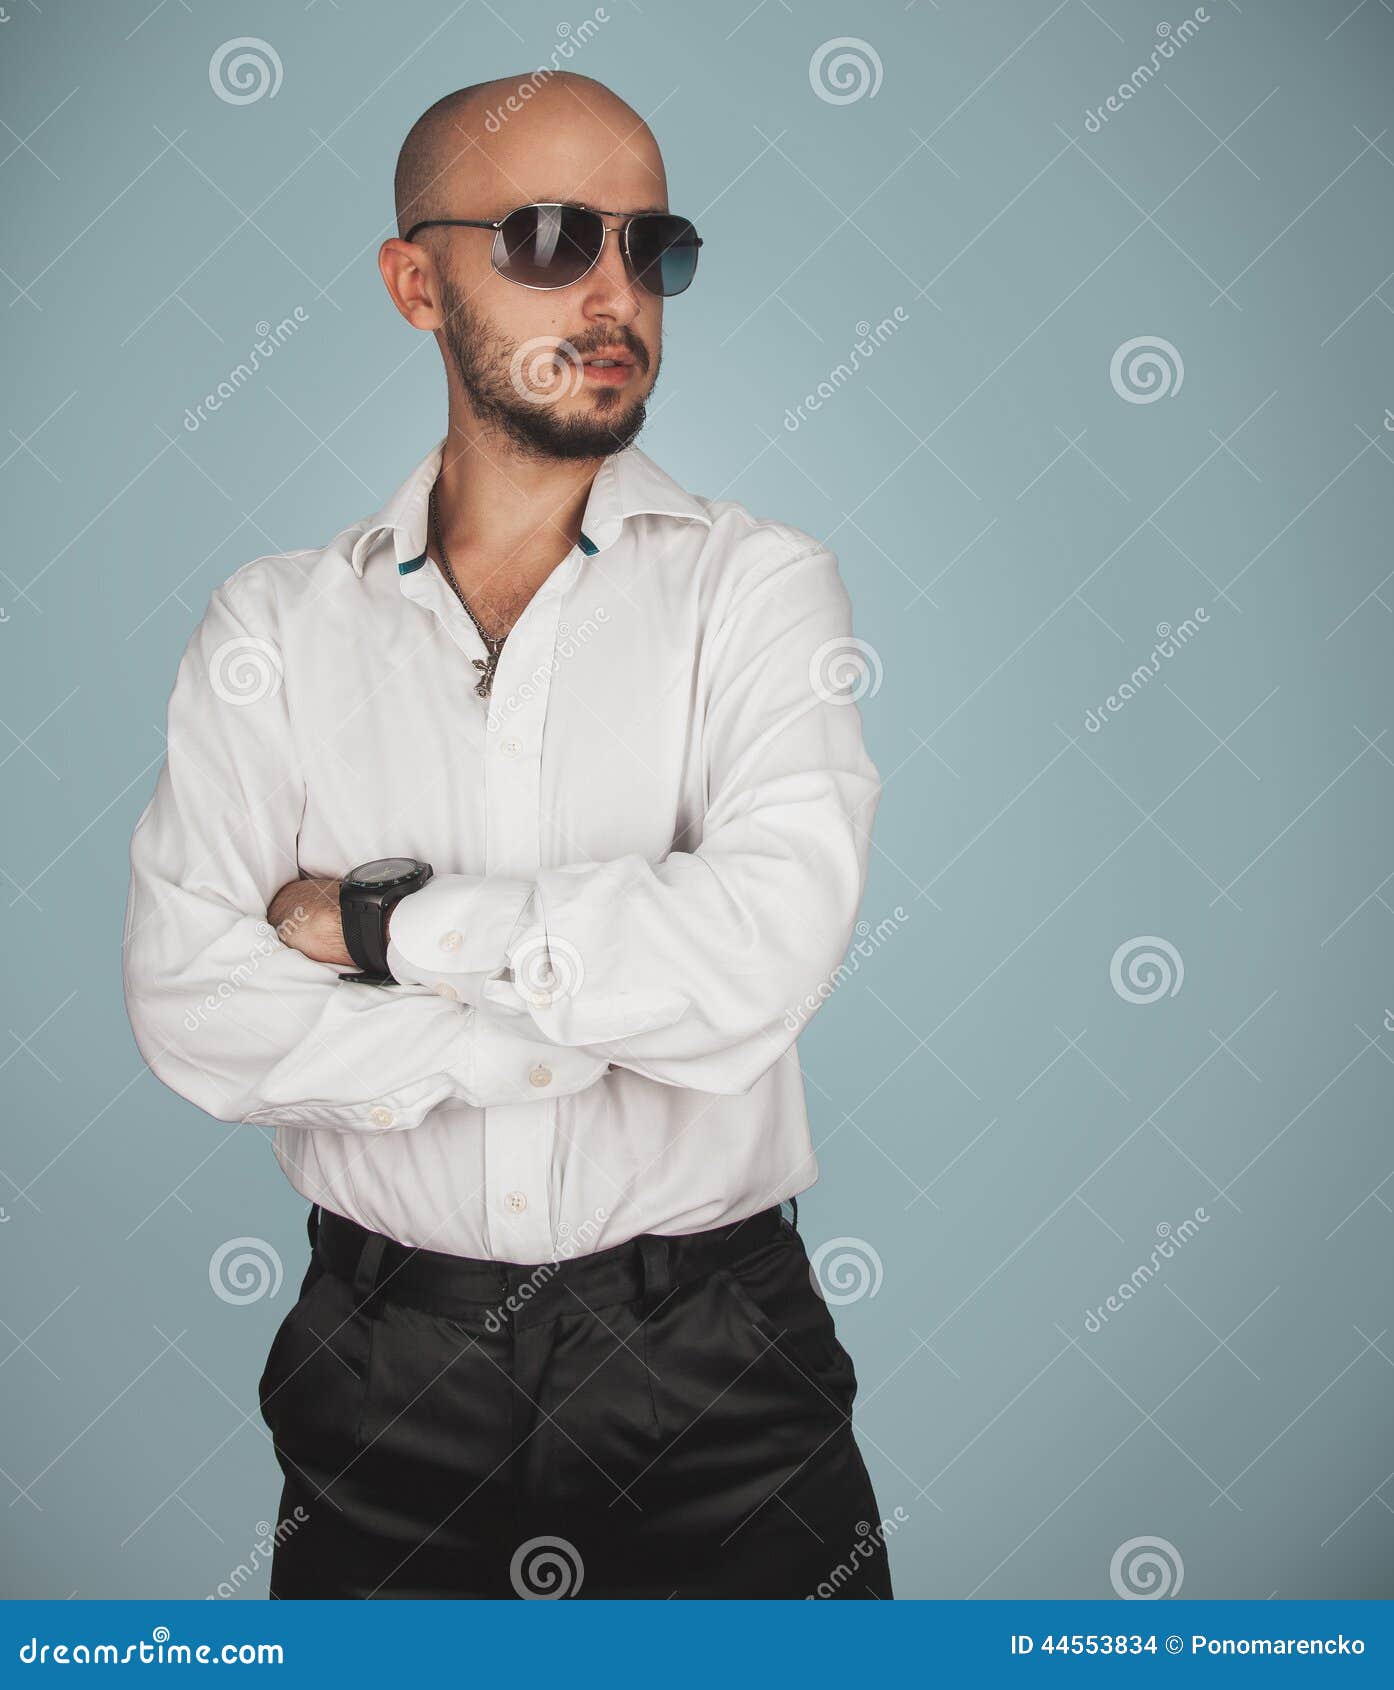 Serious man in shirt and sunglasses looking away in studio